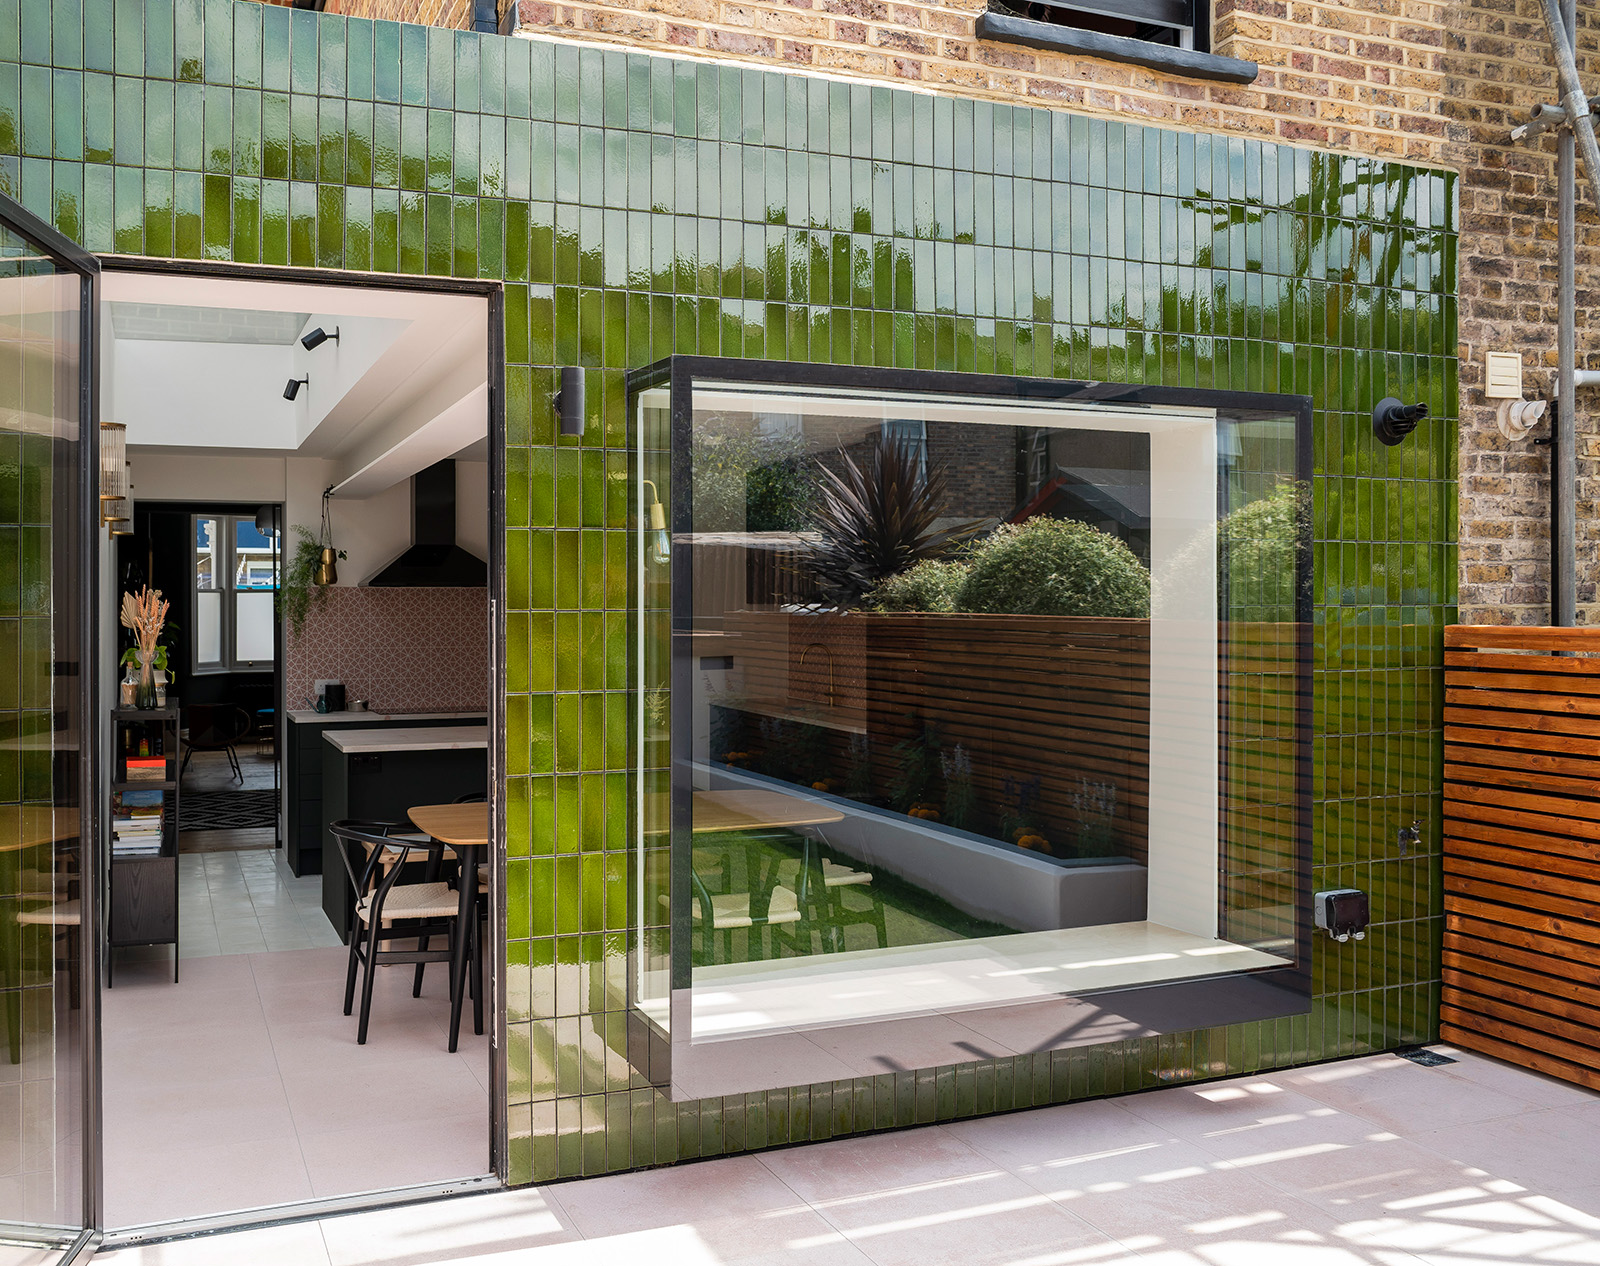 Projects - Brooke Road - James Dale Architects